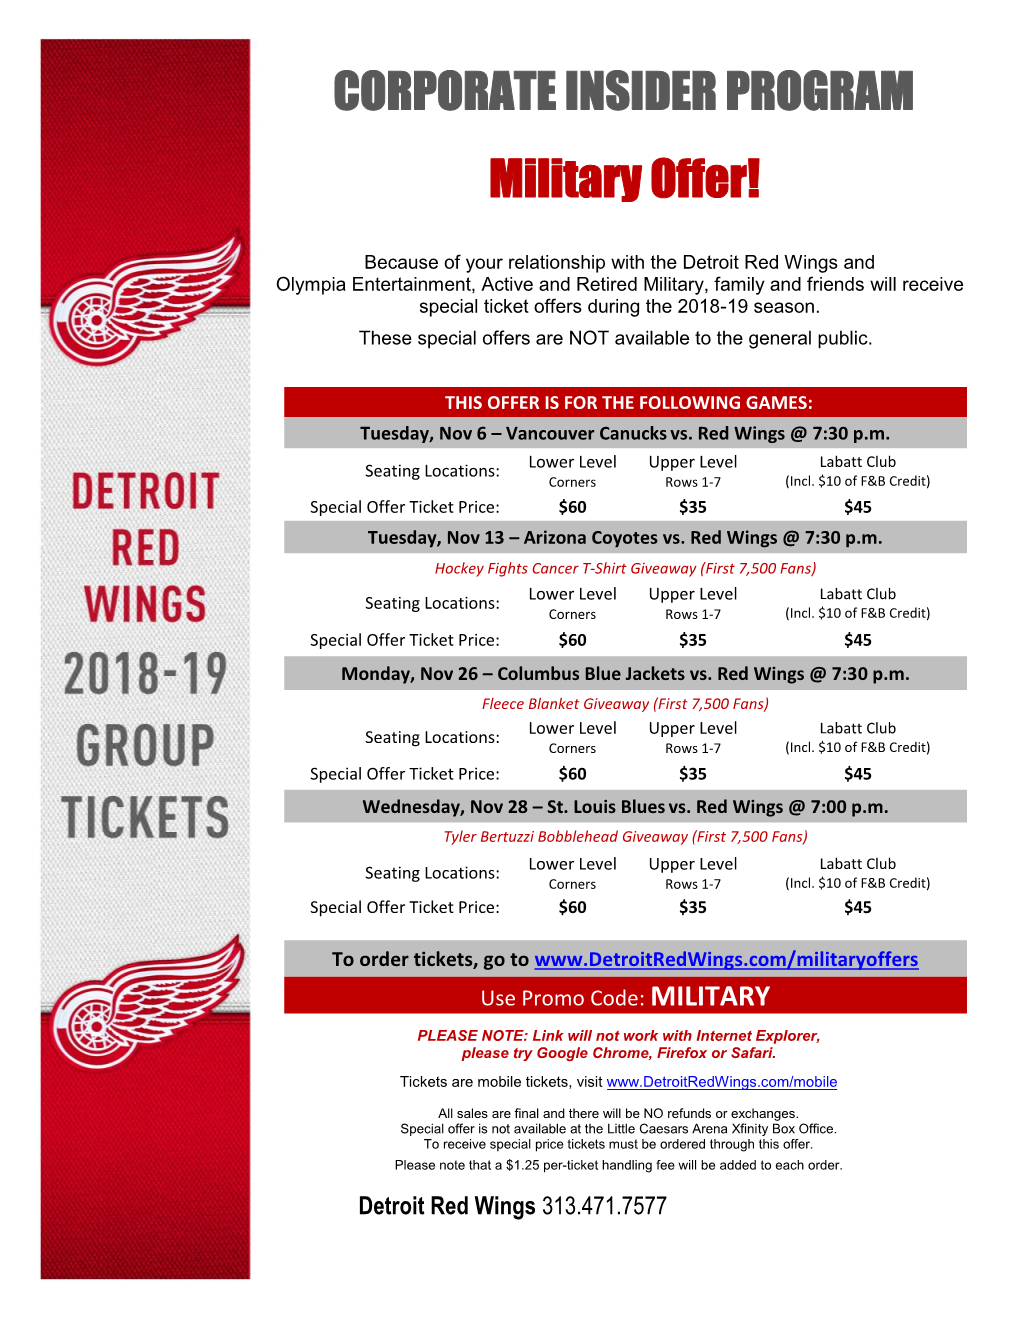 Detroit Red Wings and Olympia Entertainment, Active and Retired Military, Family and Friends Will Receive Special Ticket Offers During the 2018-19 Season